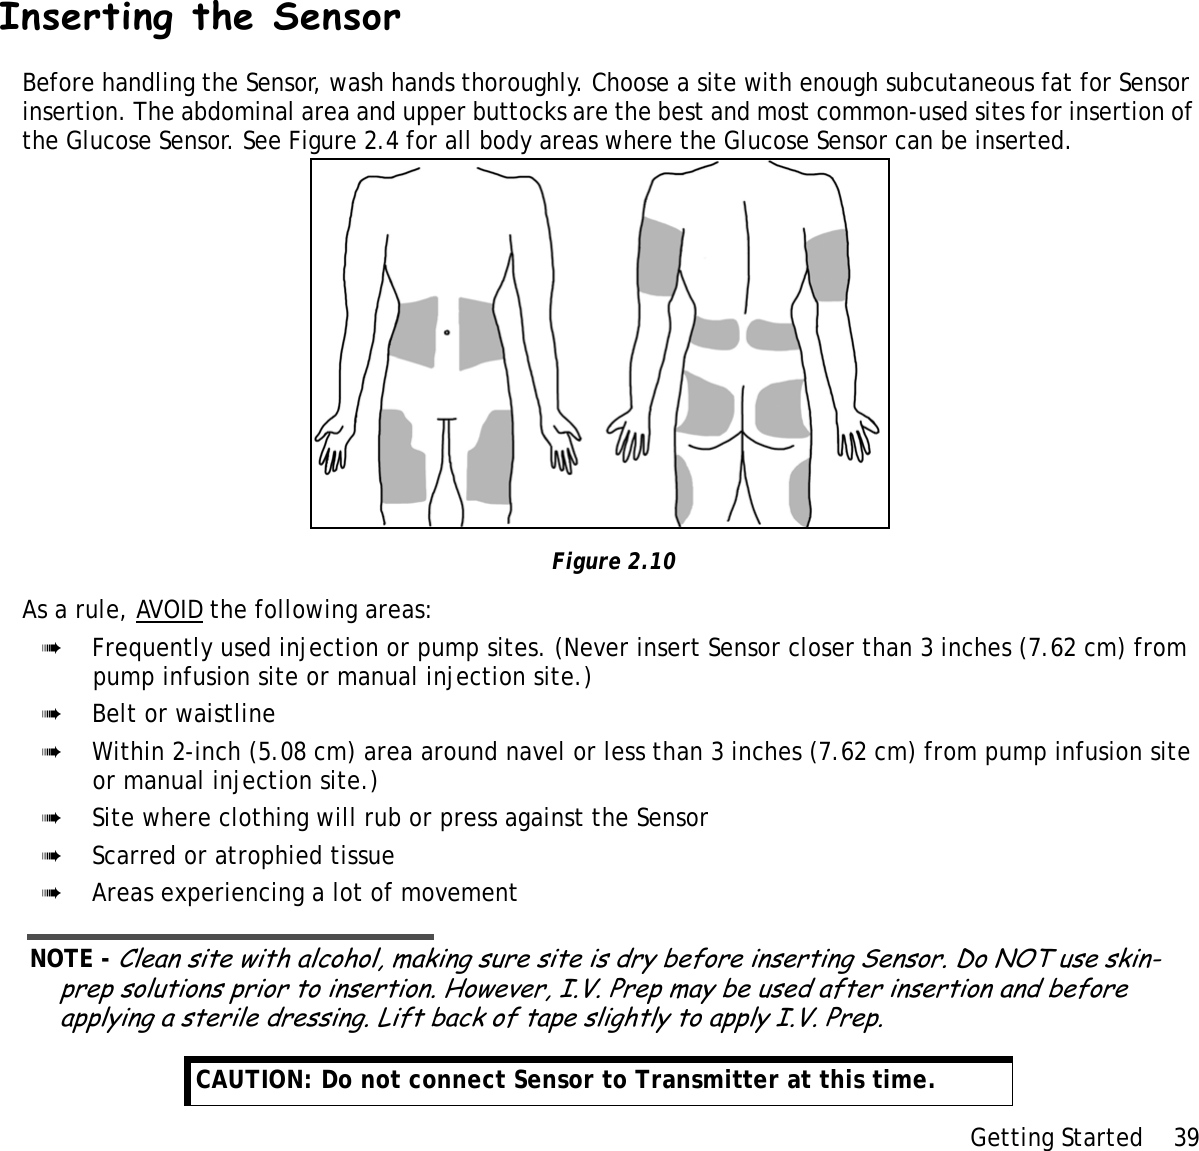 Getting Started 39 Inserting the SensorBefore handling the Sensor, wash hands thoroughly. Choose a site with enough subcutaneous fat for Sensor insertion. The abdominal area and upper buttocks are the best and most common-used sites for insertion of the Glucose Sensor. See Figure 2.4 for all body areas where the Glucose Sensor can be inserted.  Figure 2.10As a rule, AVOID the following areas:➠Frequently used injection or pump sites. (Never insert Sensor closer than 3 inches (7.62 cm) from pump infusion site or manual injection site.)➠Belt or waistline➠Within 2-inch (5.08 cm) area around navel or less than 3 inches (7.62 cm) from pump infusion site or manual injection site.)➠Site where clothing will rub or press against the Sensor➠Scarred or atrophied tissue➠Areas experiencing a lot of movementNOTE - Clean site with alcohol, making sure site is dry before inserting Sensor. Do NOT use skin-prep solutions prior to insertion. However, I.V. Prep may be used after insertion and before applying a sterile dressing. Lift back of tape slightly to apply I.V. Prep.CAUTION: Do not connect Sensor to Transmitter at this time. 